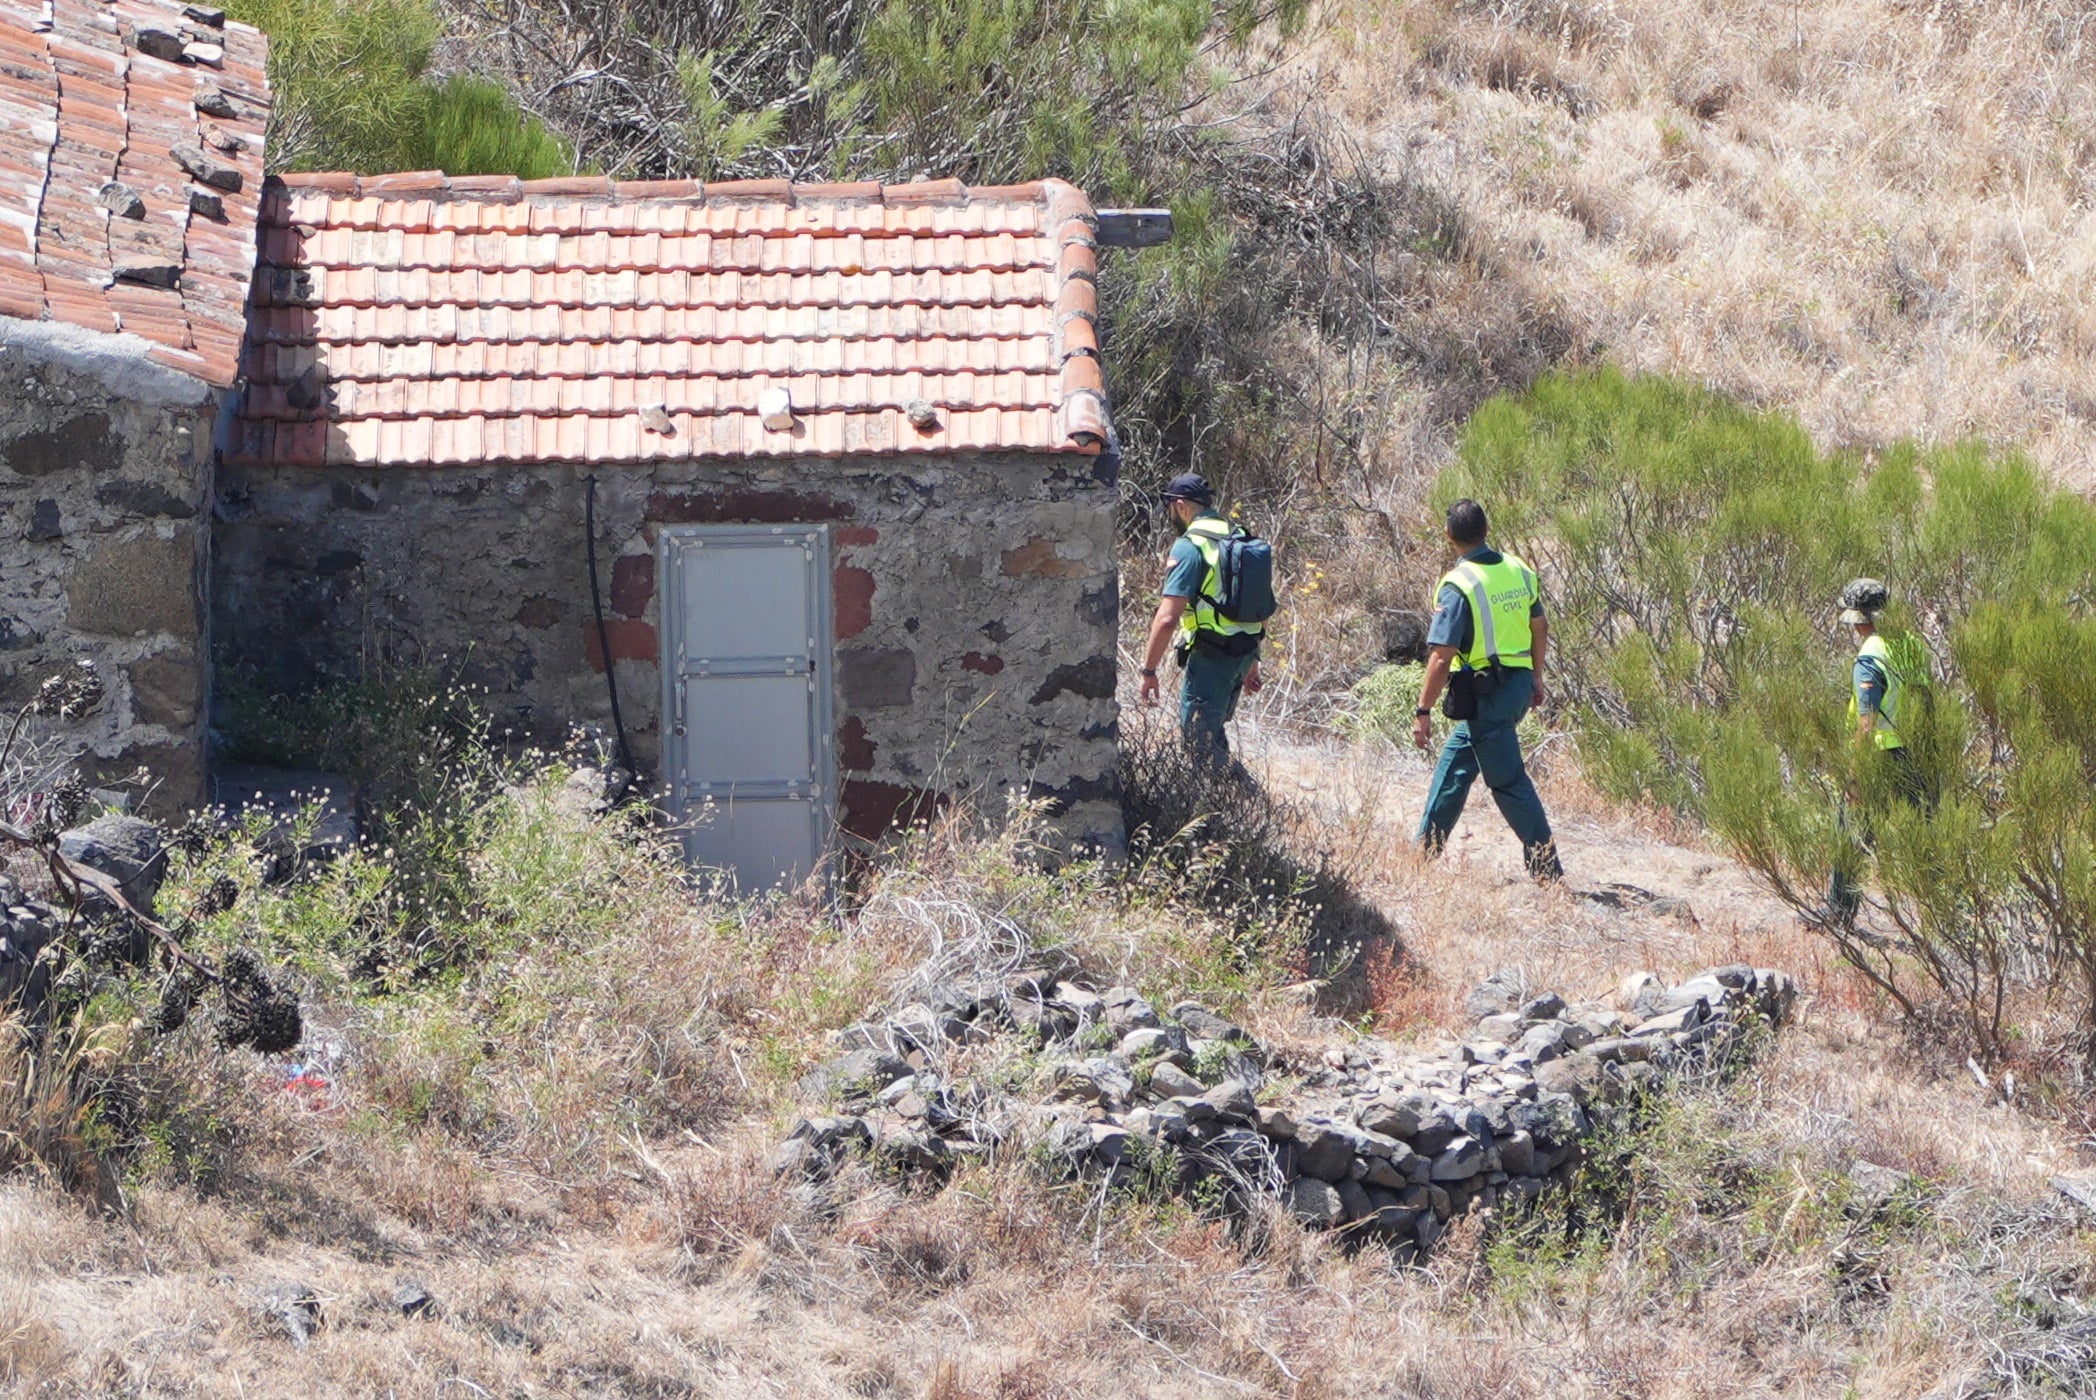 Outbuildings in the Masca valley have also been searched by police and sniffer dogs